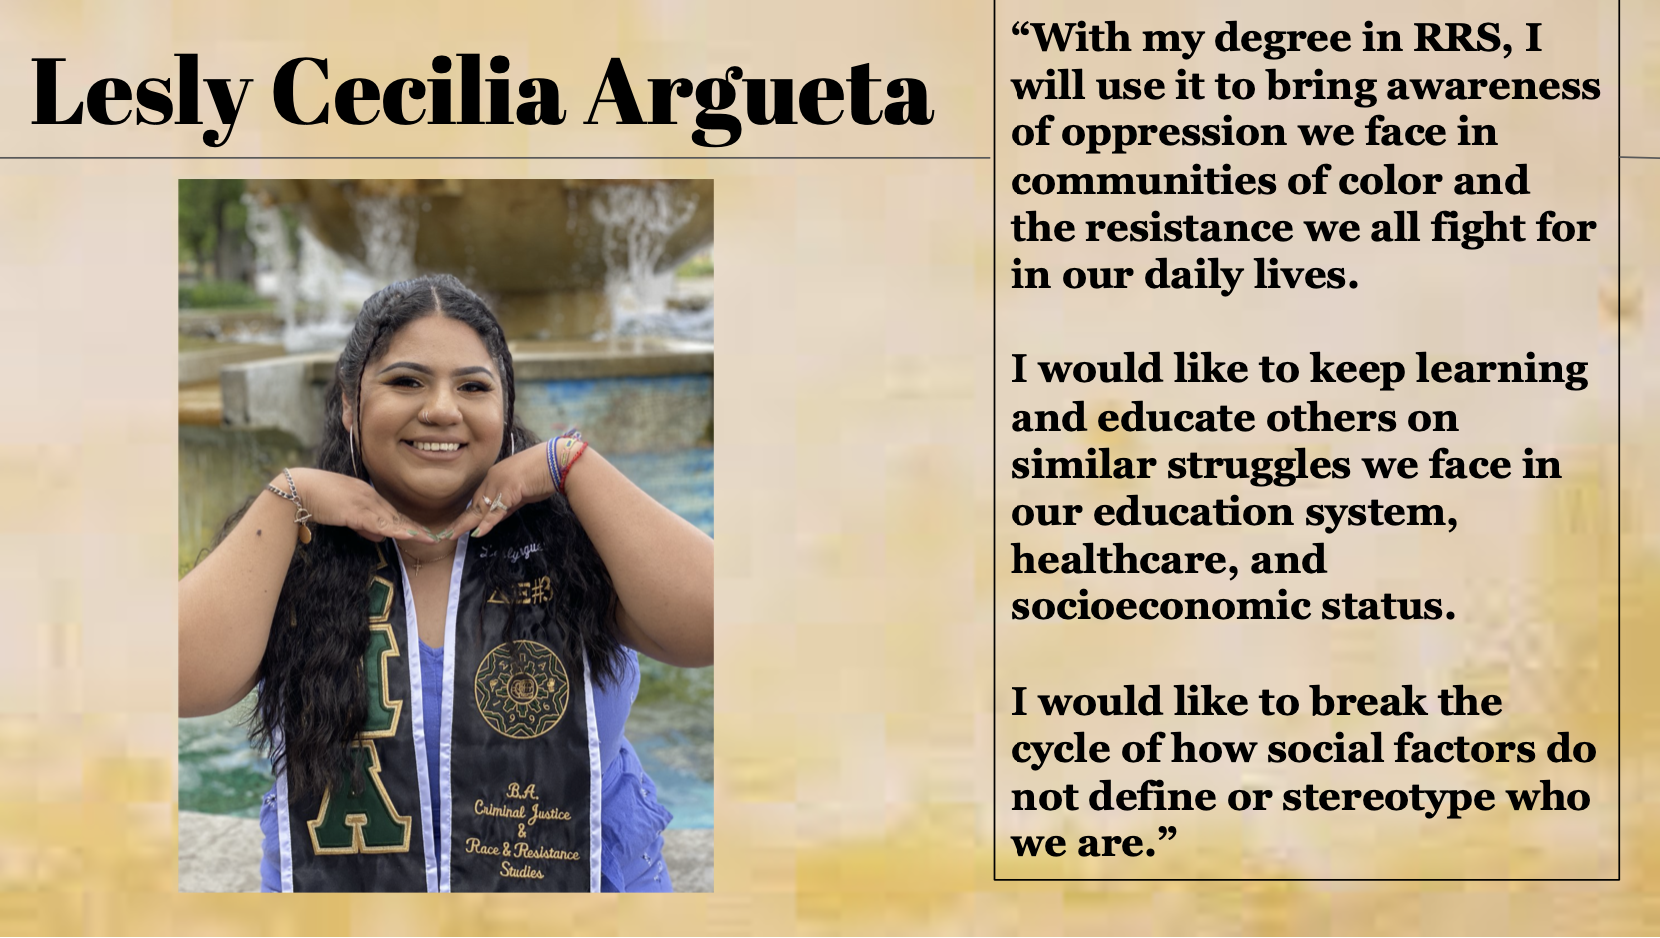 Lesly Cecilia Argueta would like to keep learning and educate others on similar struggles we face in our education system, healthcare, and socioeconomic status.